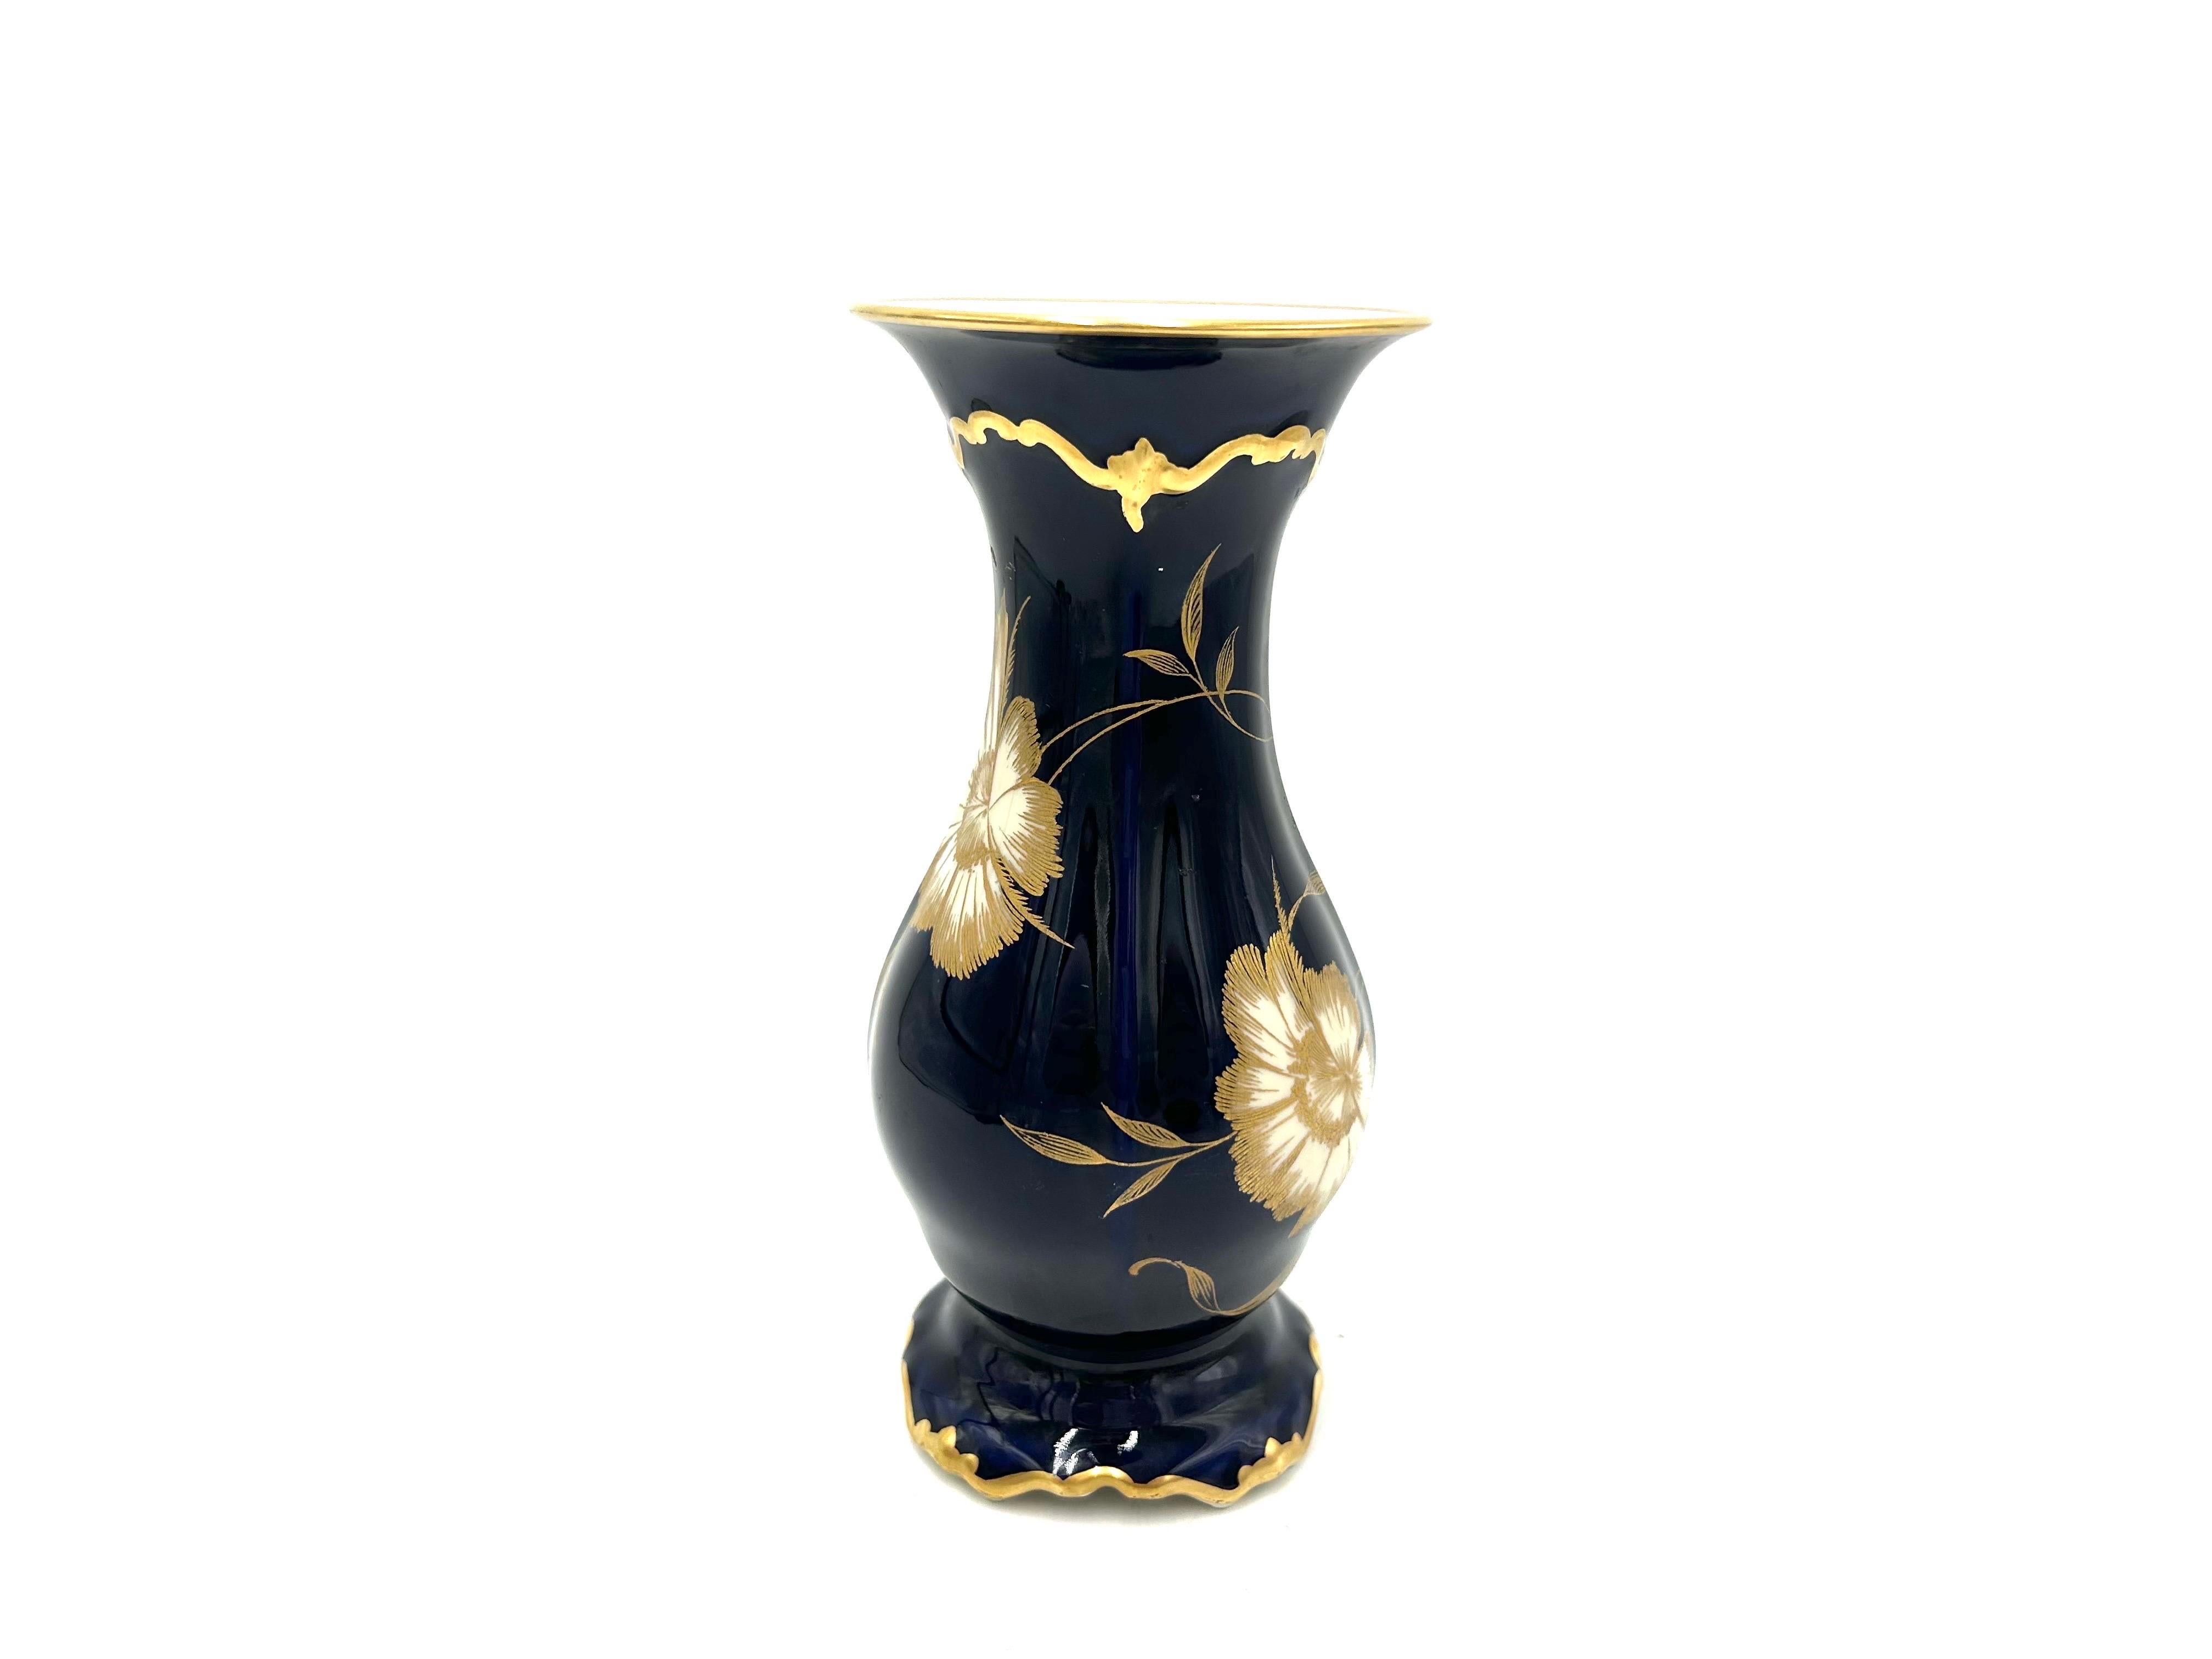 Porcelain vase from the Pompadour collection, made in Germany by the excellent Rosenthal label. Ecru porcelain decorated in the echt cobalt technique, with a motif of golden flowers on a navy blue background. The product is marked with a mark from